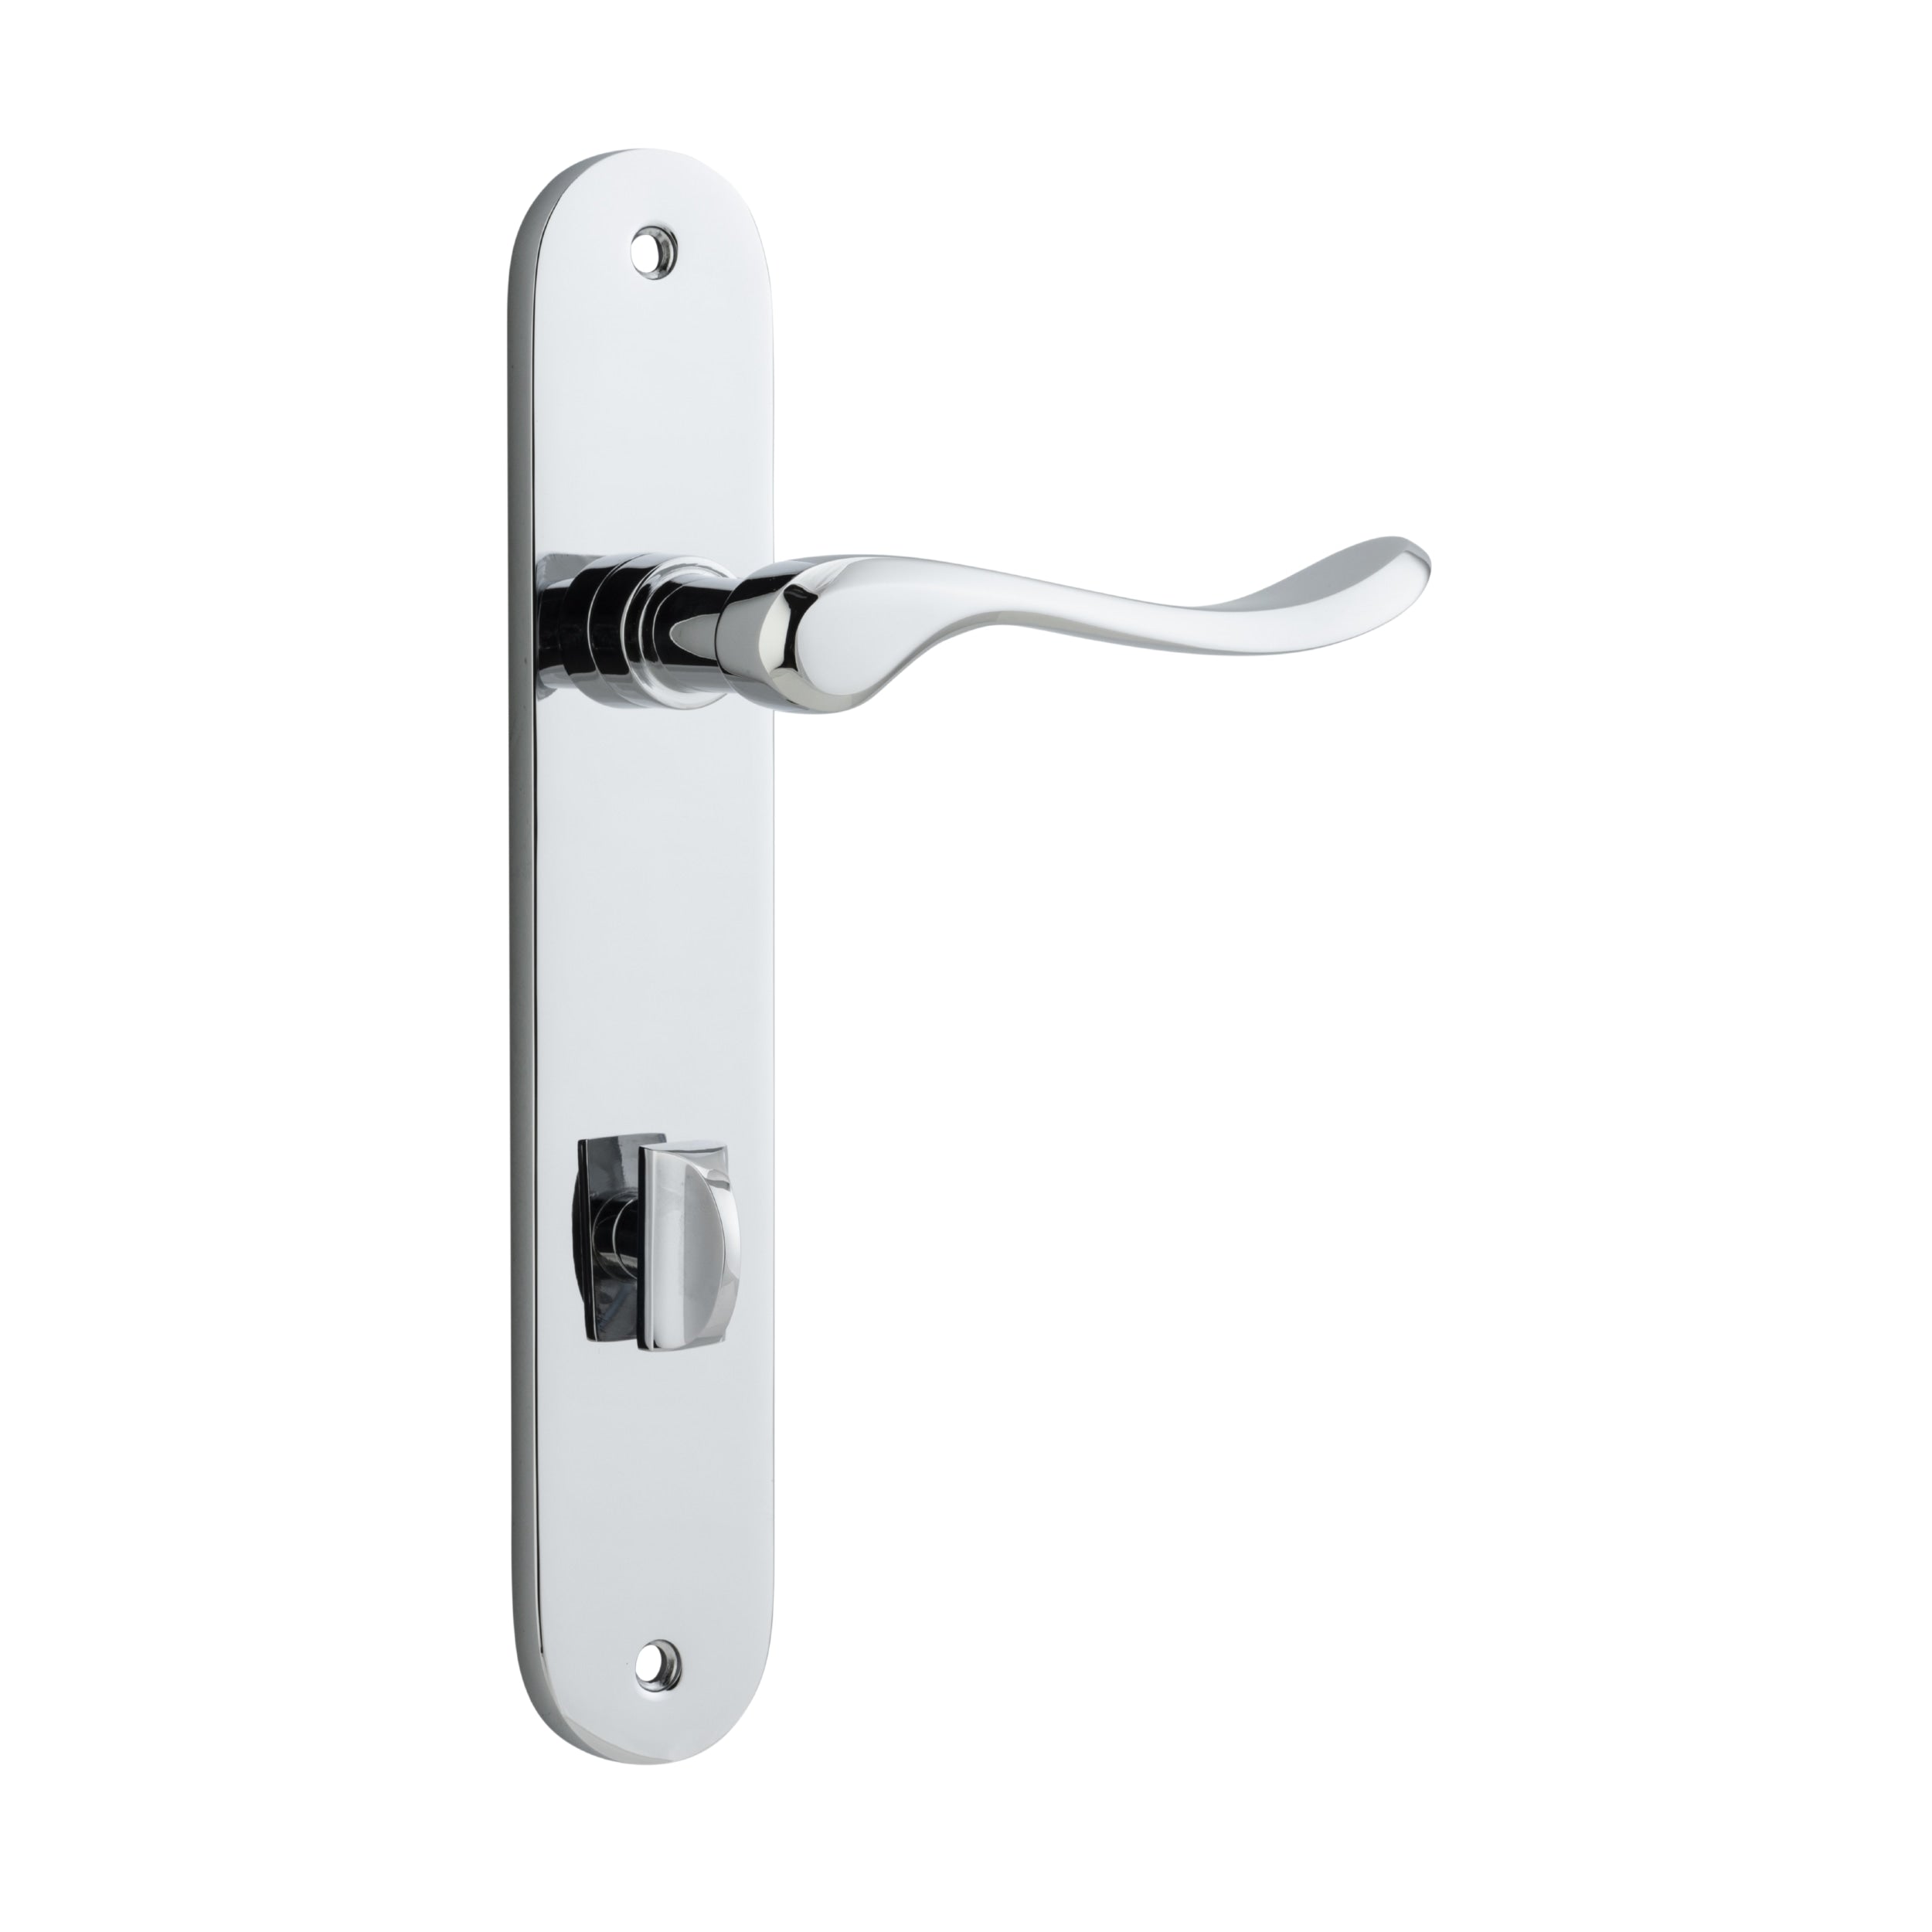 Iver Door Handle Stirling Oval Privacy Pair Polished Chrome